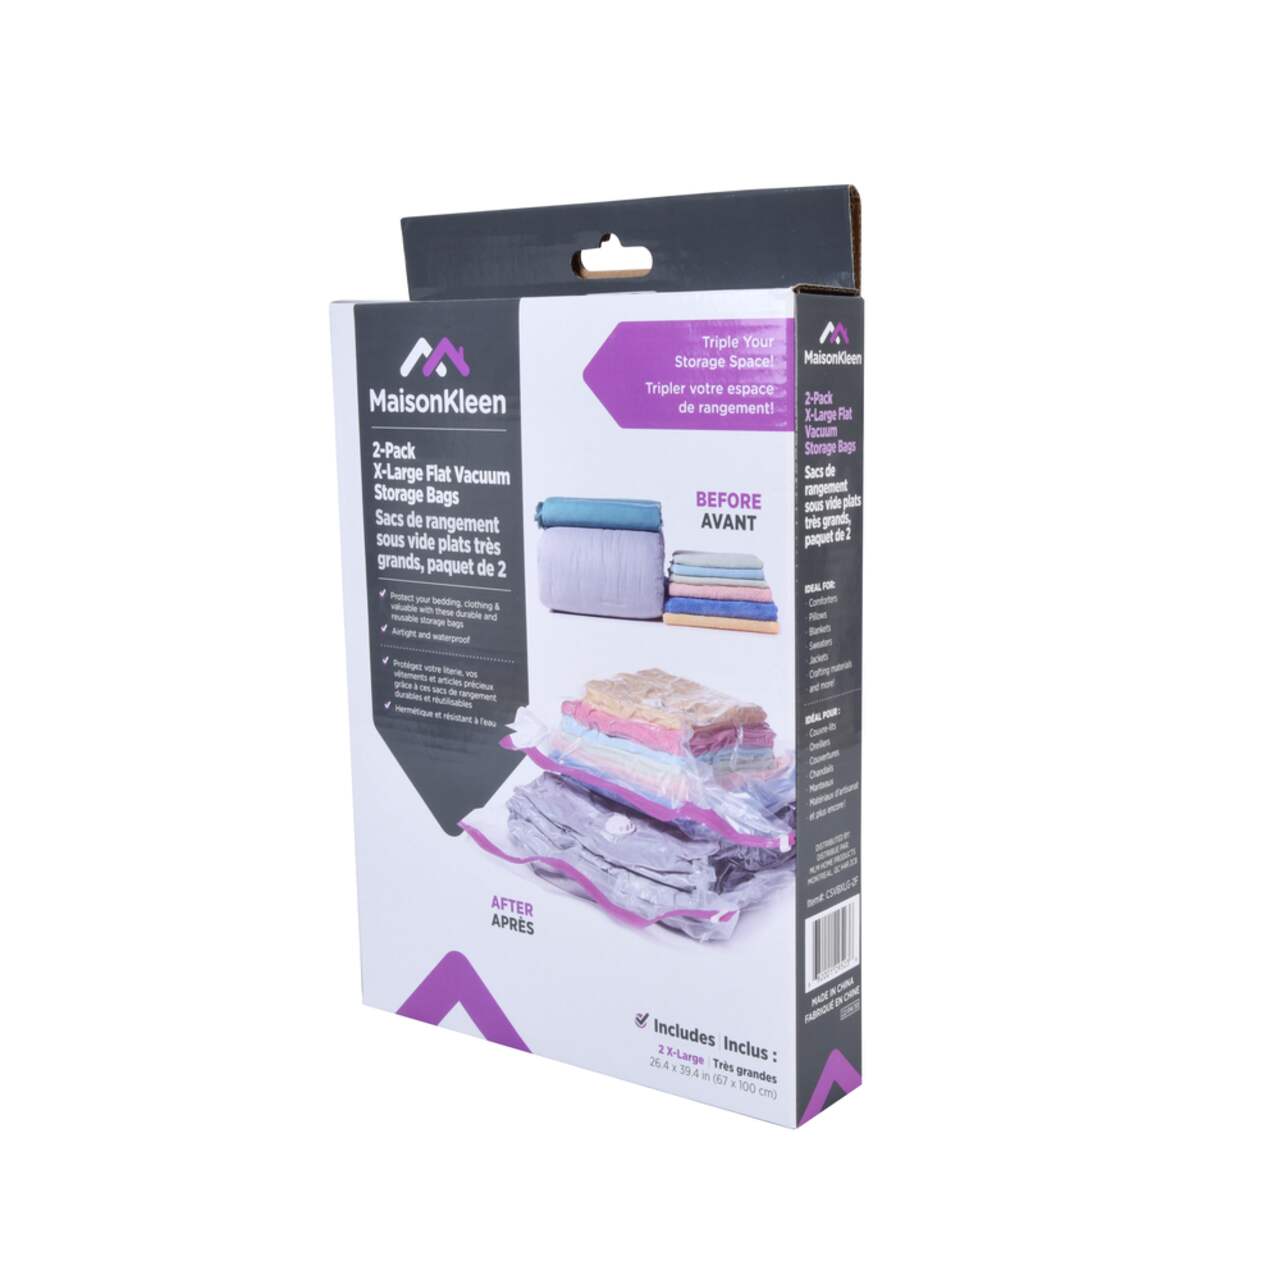 https://media-www.canadiantire.ca/product/living/home-organization/closet-organization/0681801/2-pack-extra-large-vaccum-storage-bags-32f7e2d8-b842-4965-b192-f7c81ba758d4.png?imdensity=1&imwidth=640&impolicy=mZoom